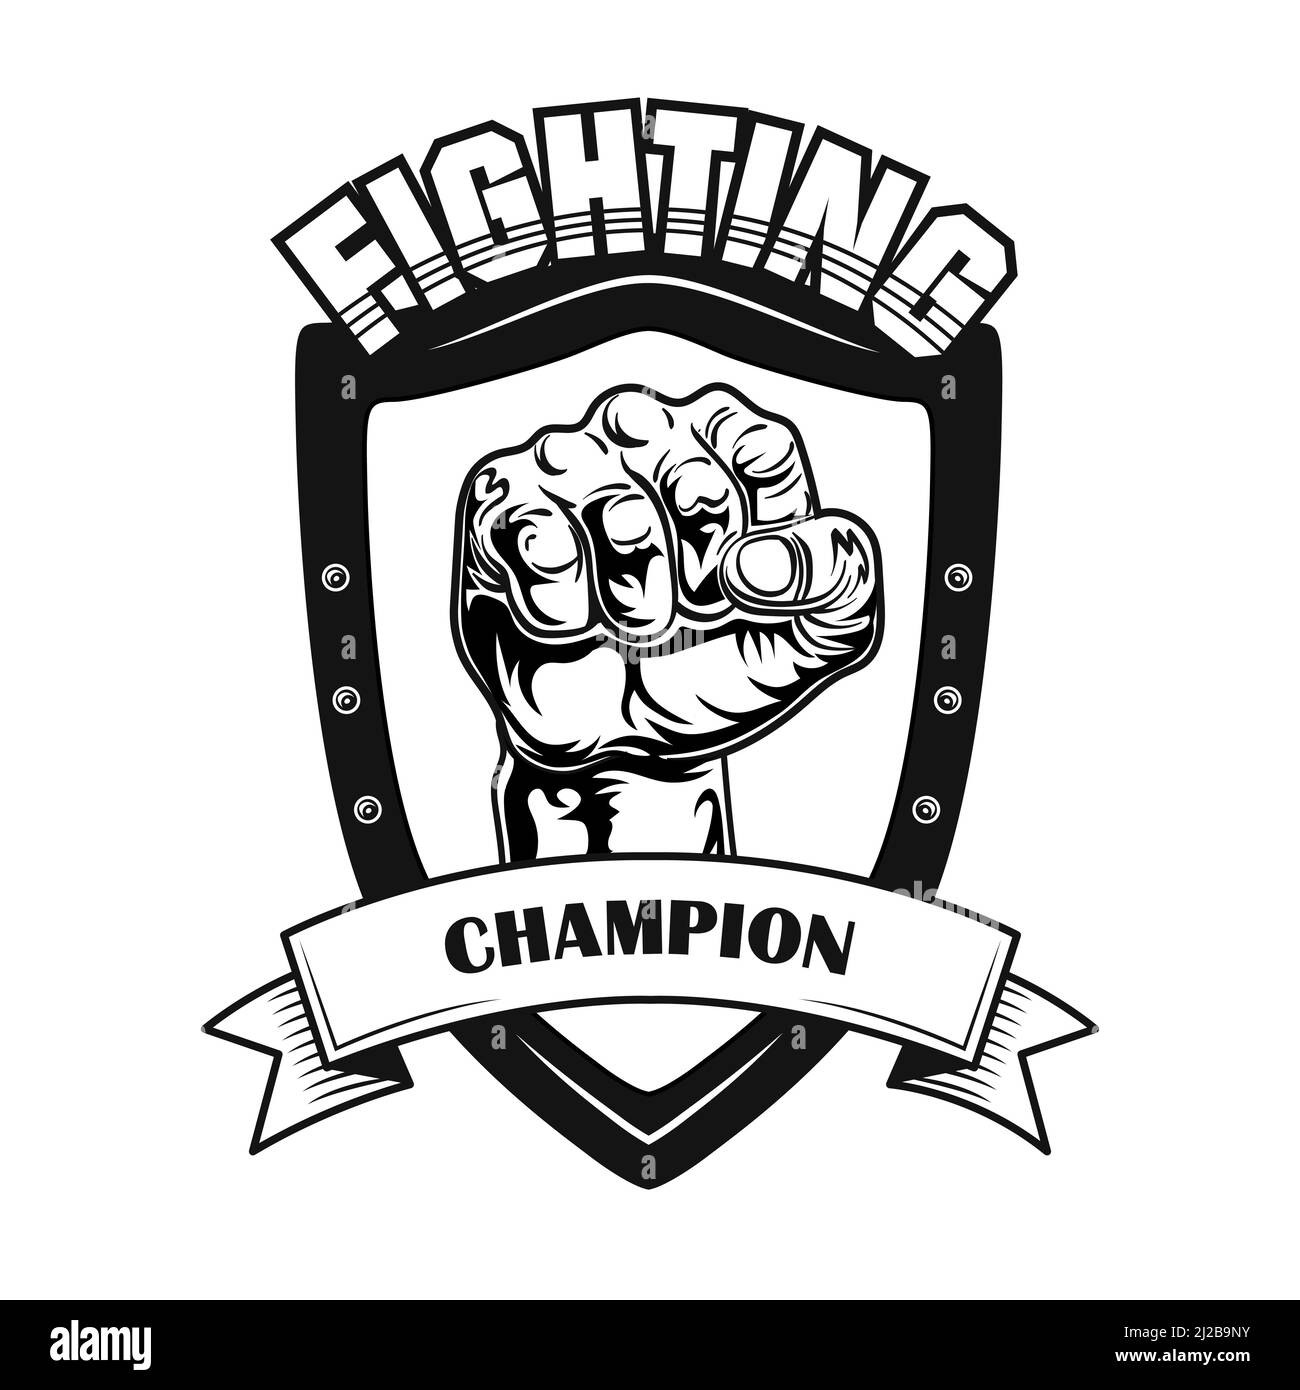 Fighting champion symbol vector illustration. Fists on heraldry ir patch, text on ribbon. Lifestyle concept for fight club emblem or gangsta tattoo te Stock Vector